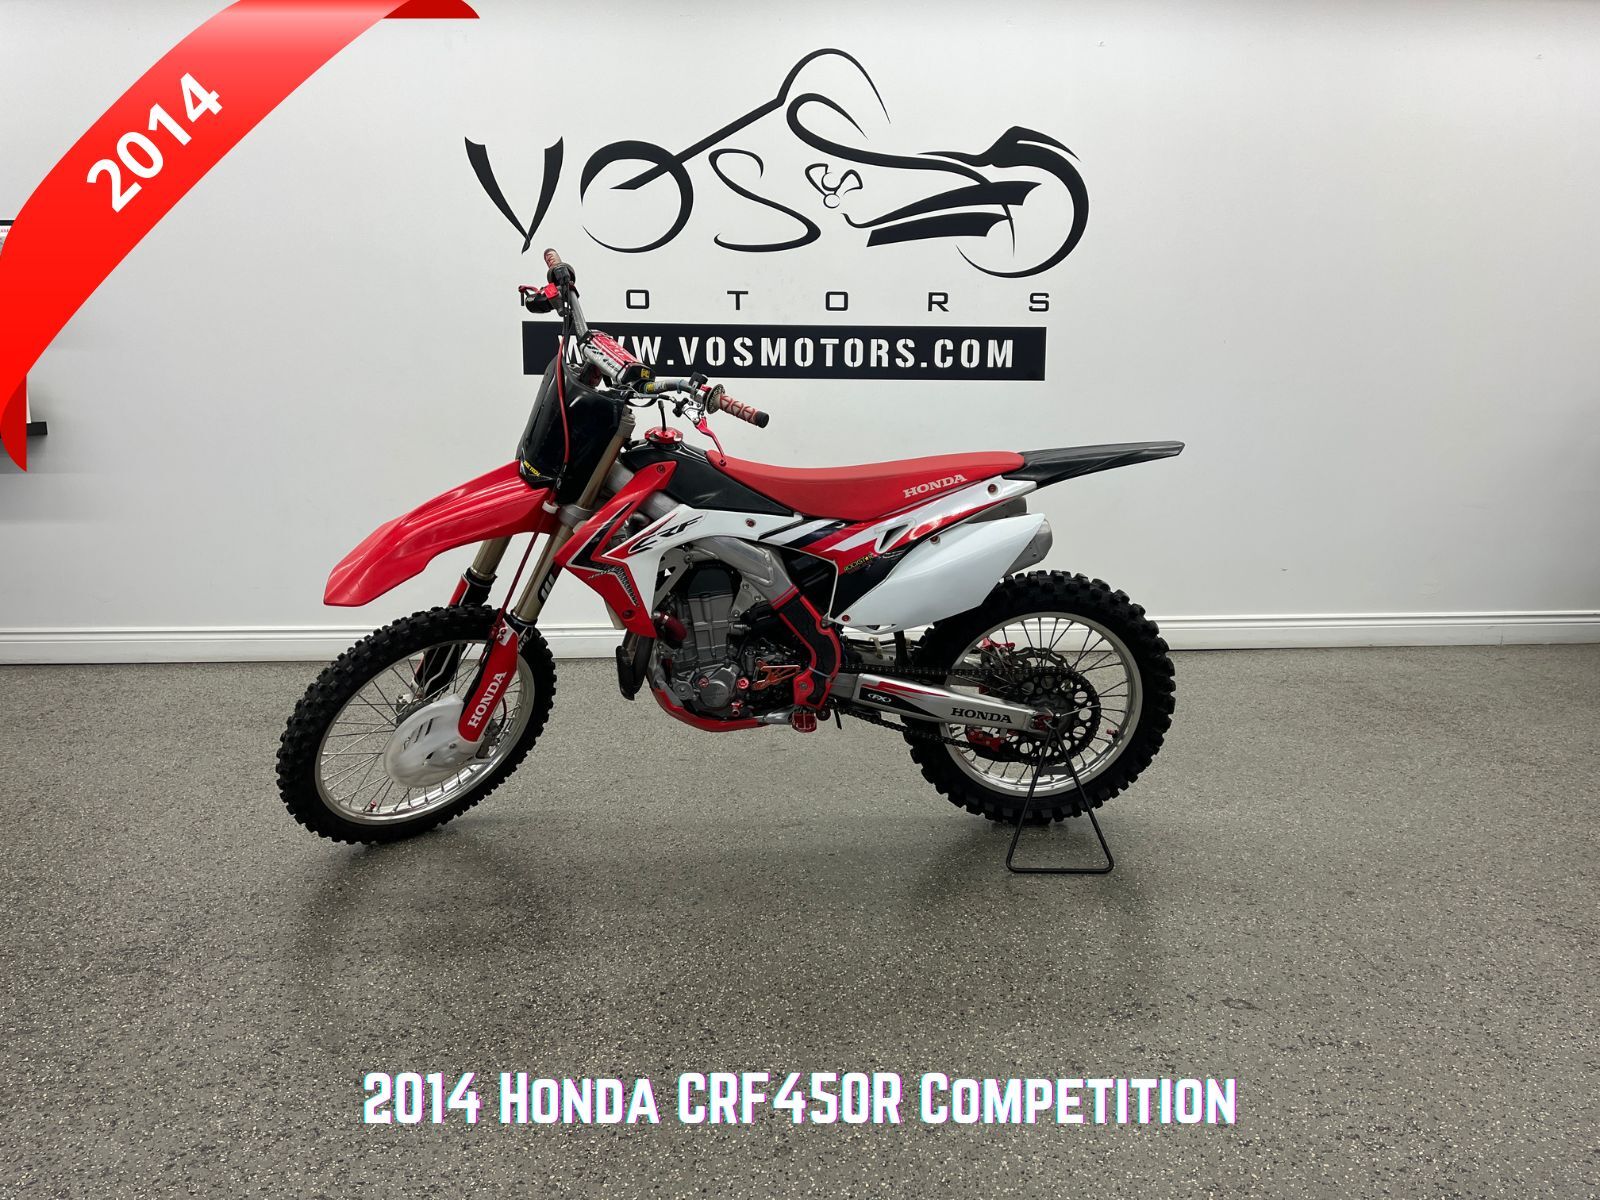 2014 Honda CRF450R Competition - V5733 - -No Payments for 1 Year**